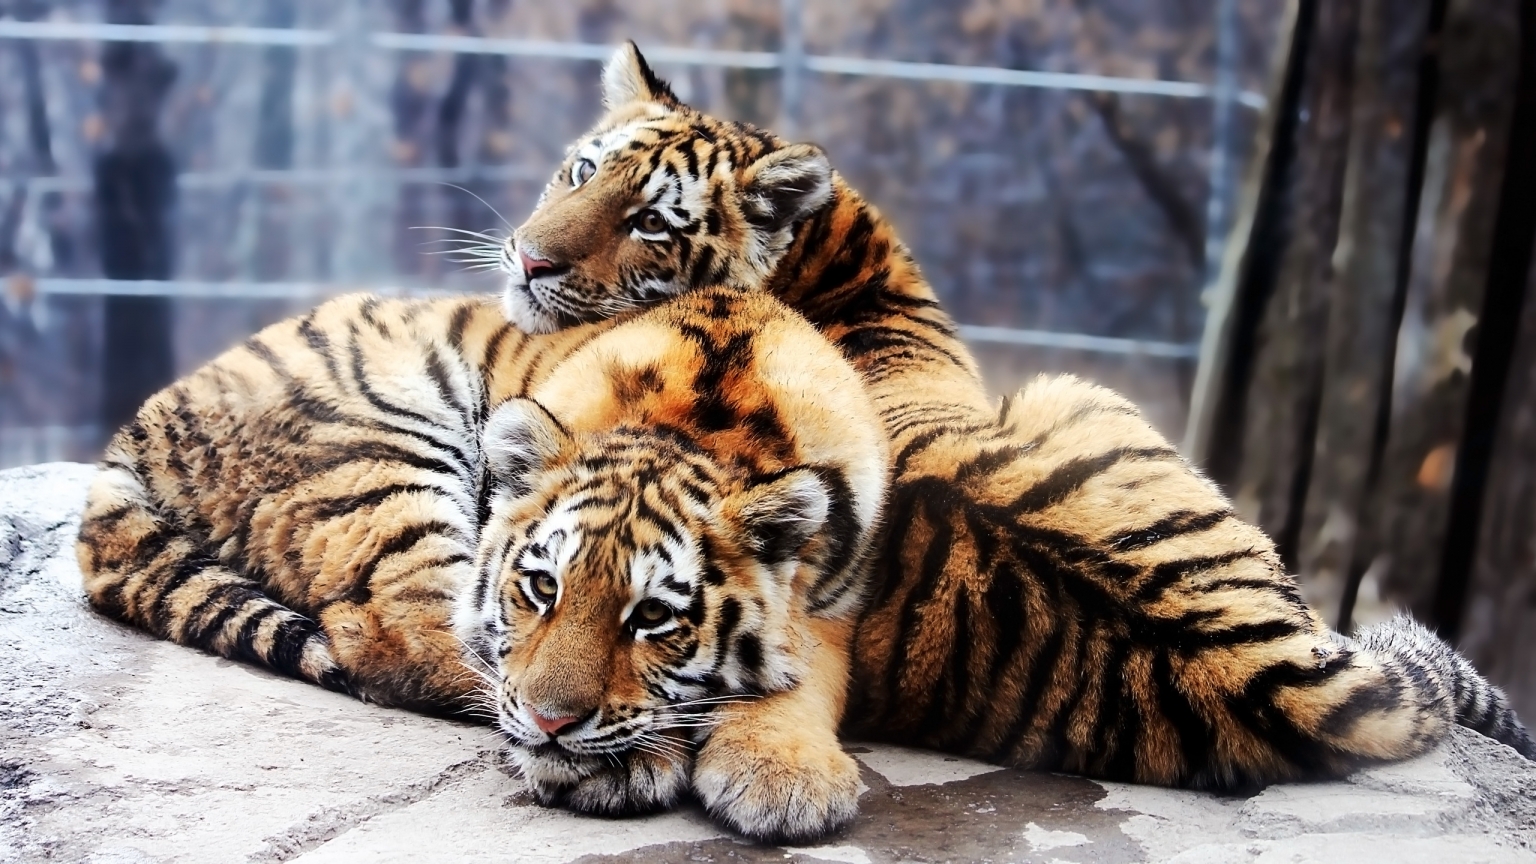 Tiger Friends for 1536 x 864 HDTV resolution